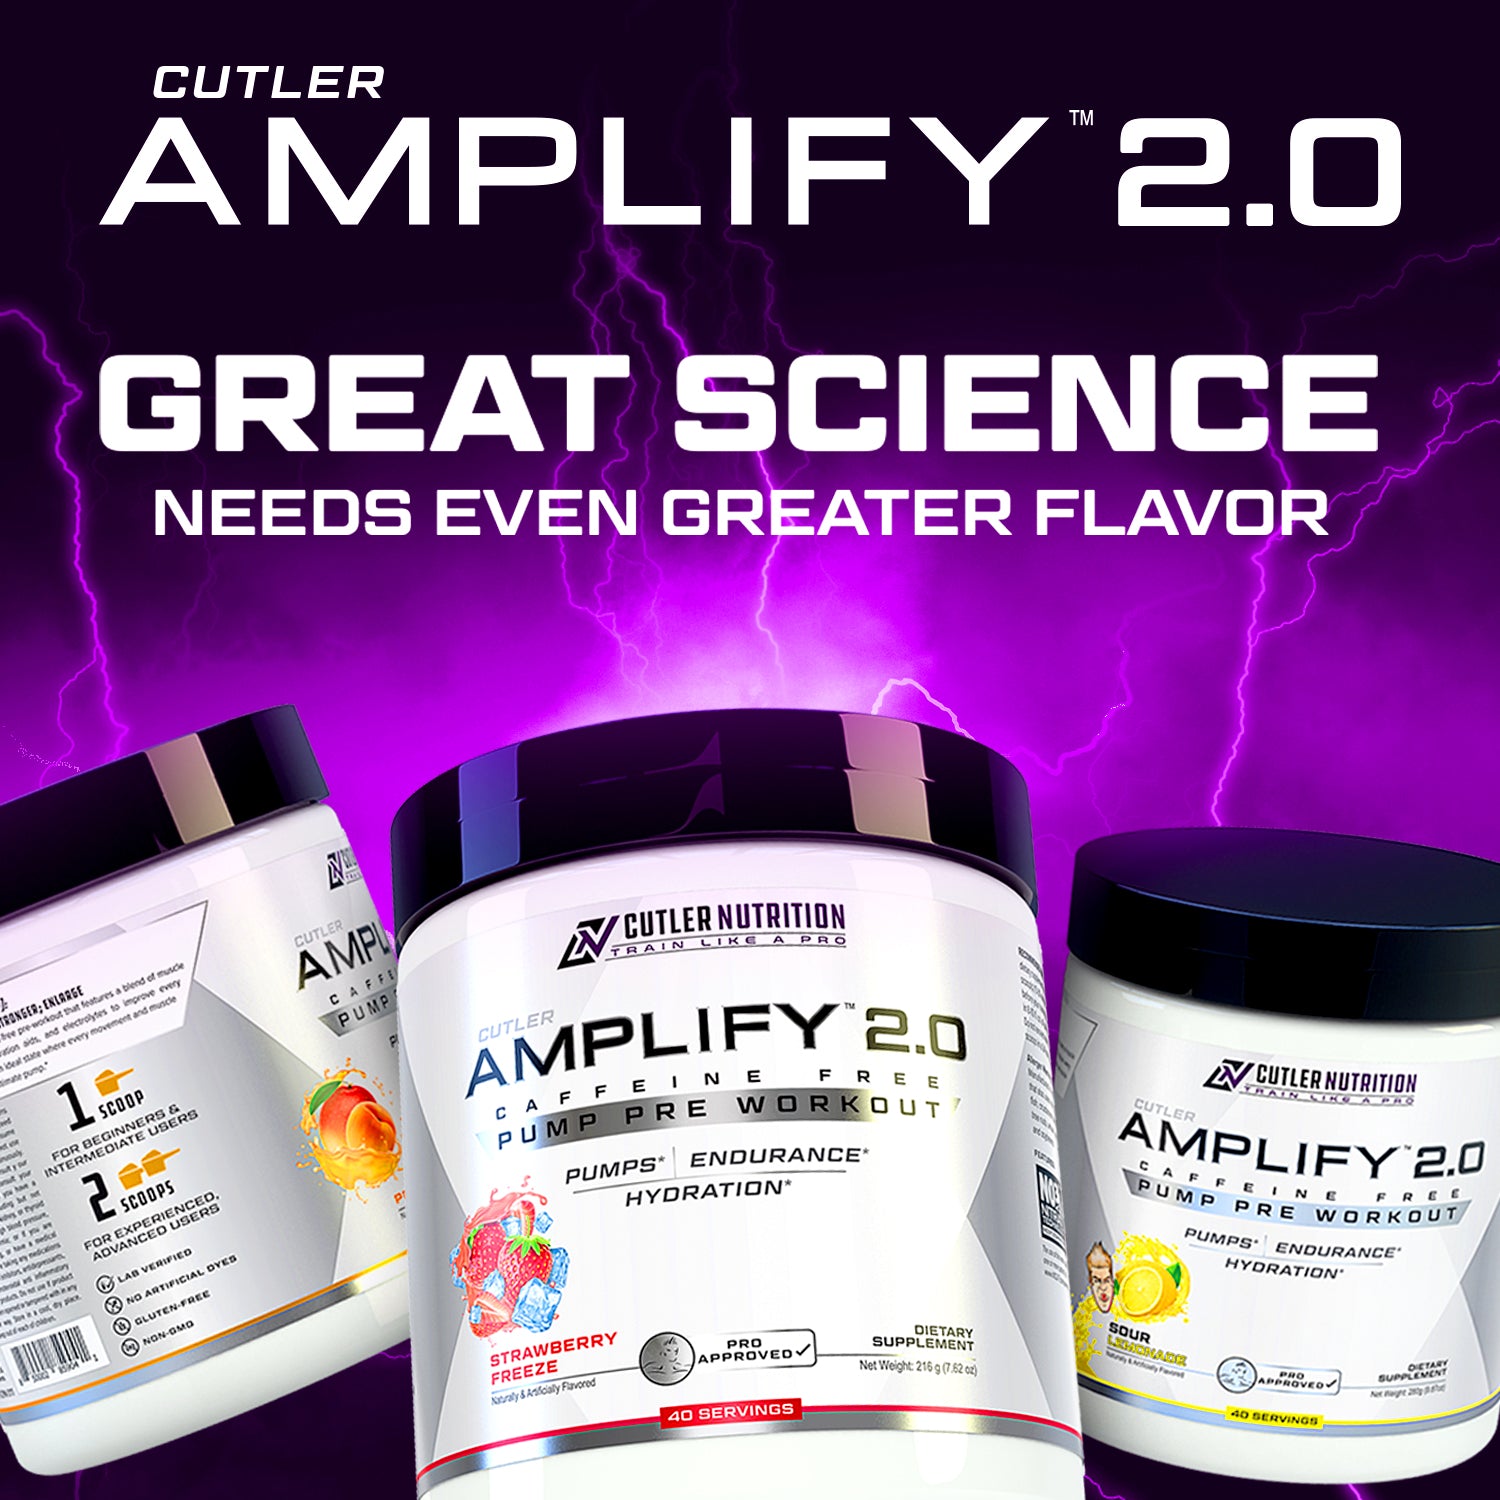 Amplified pre-workout formula